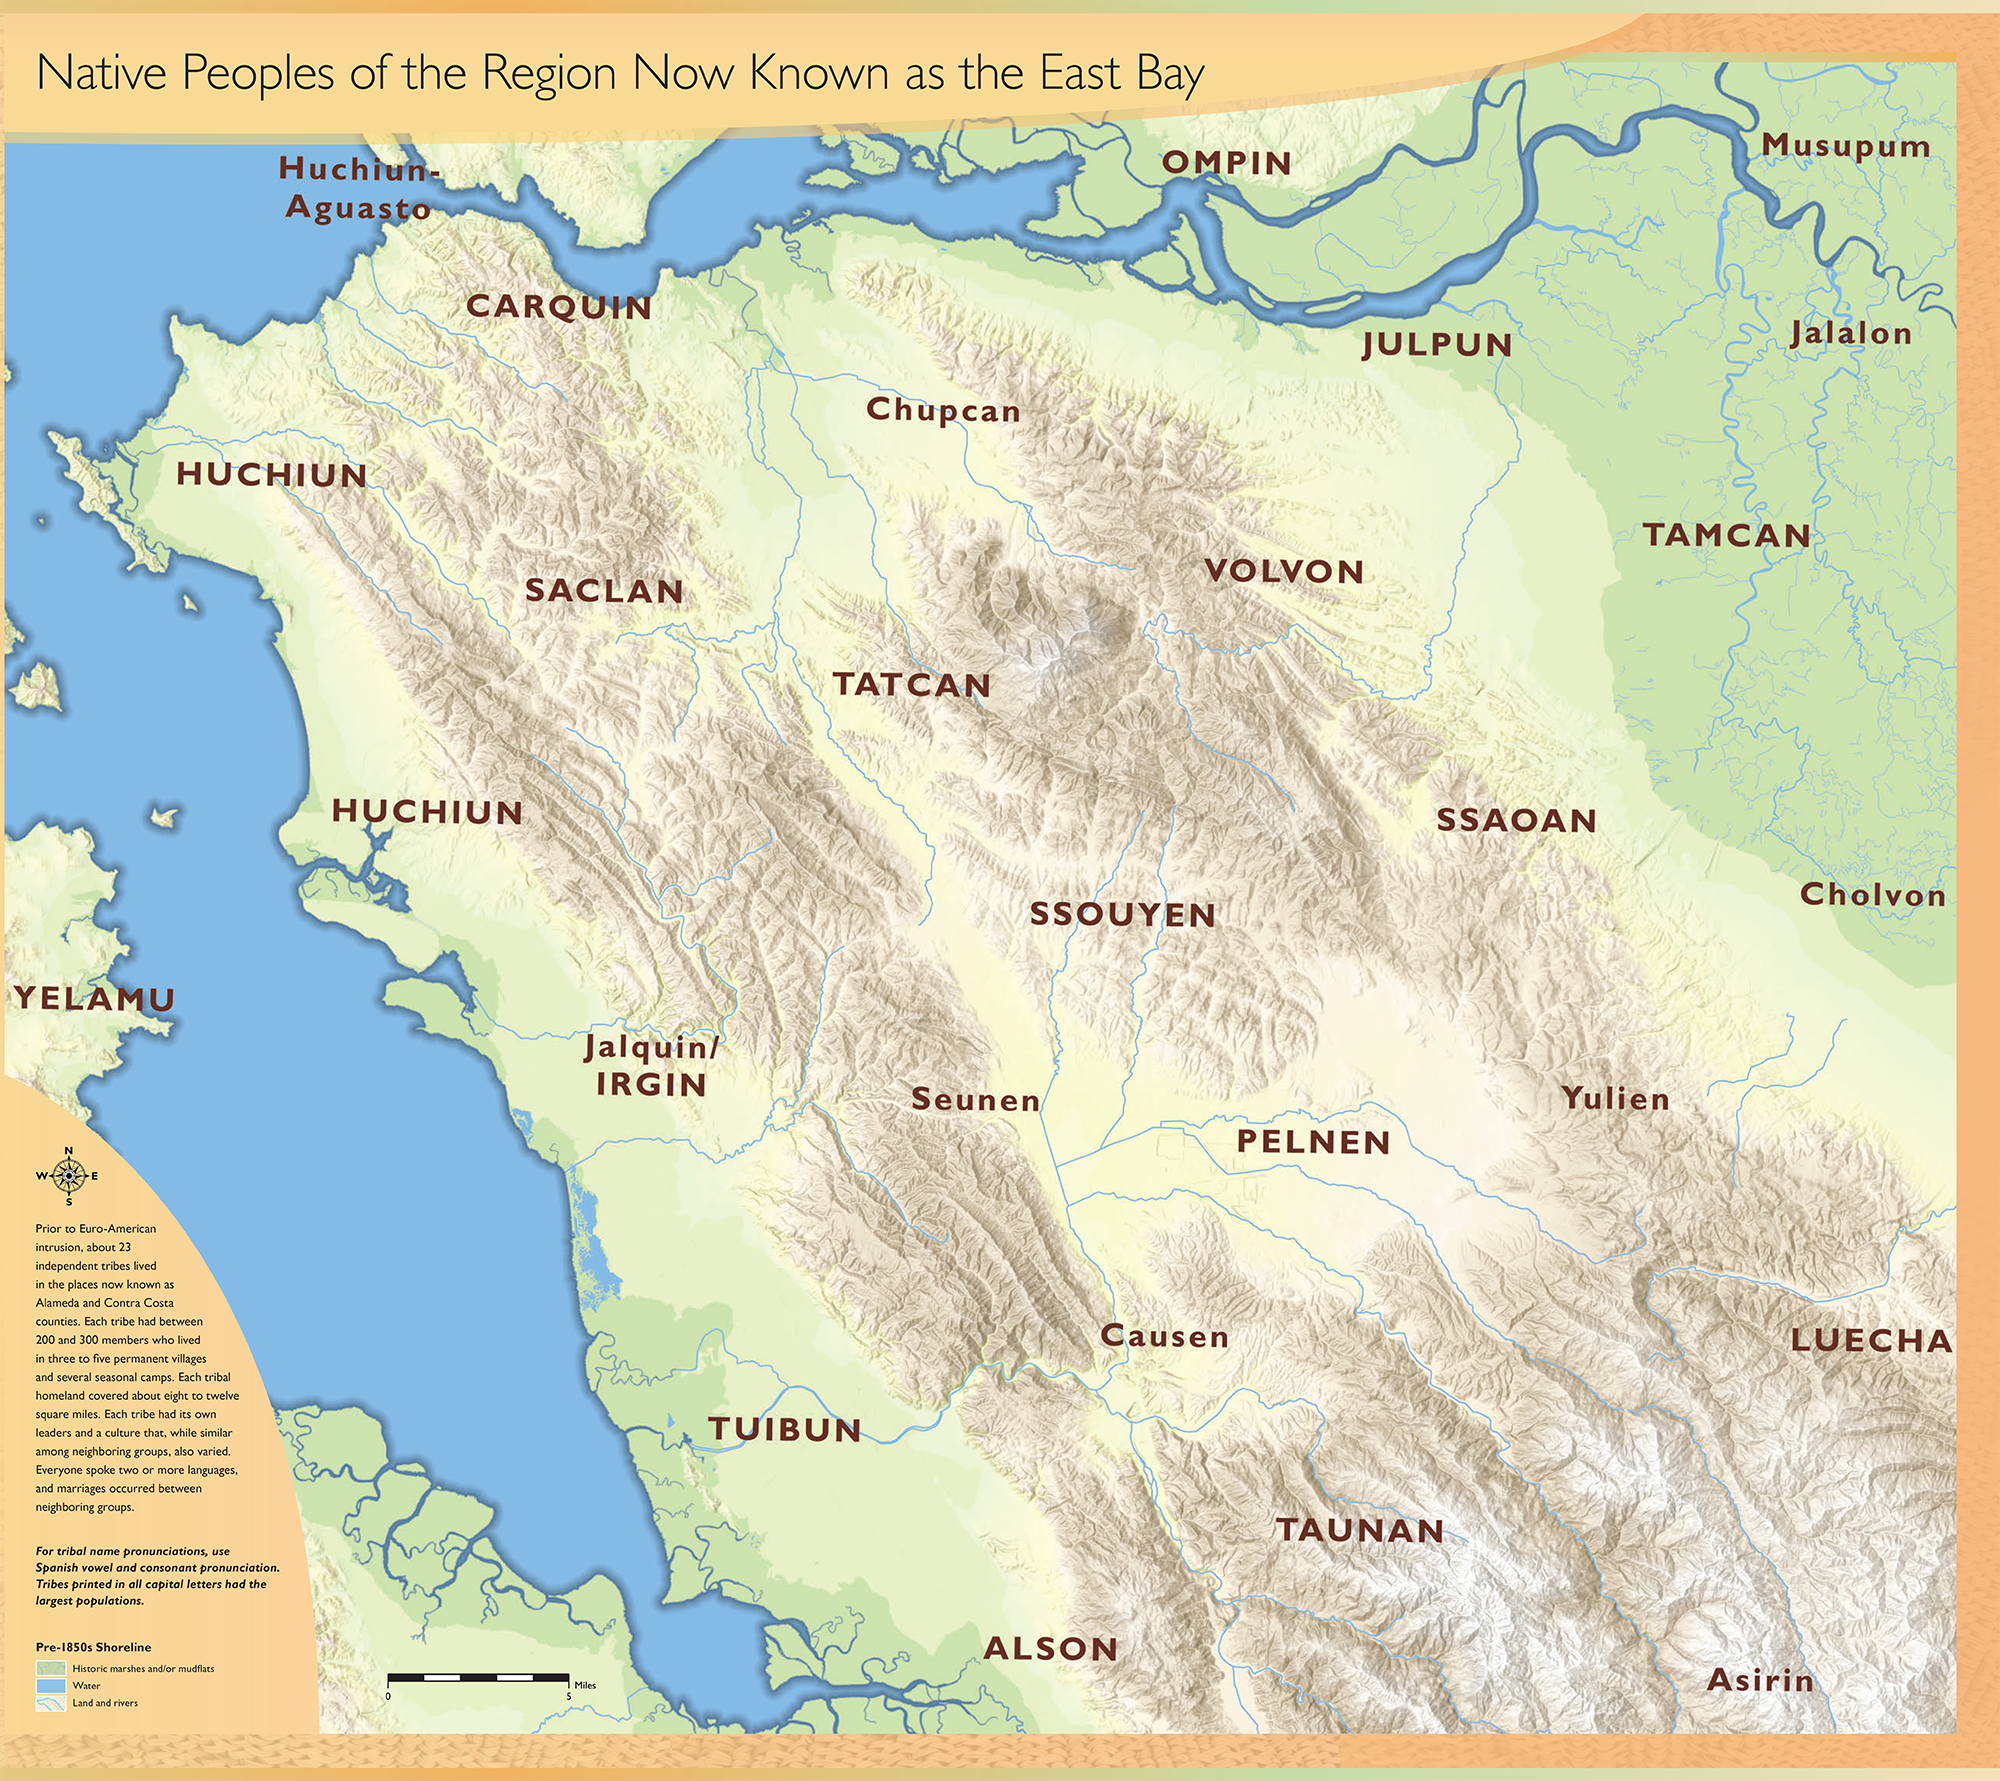 map of Native Peoples of the East Bay